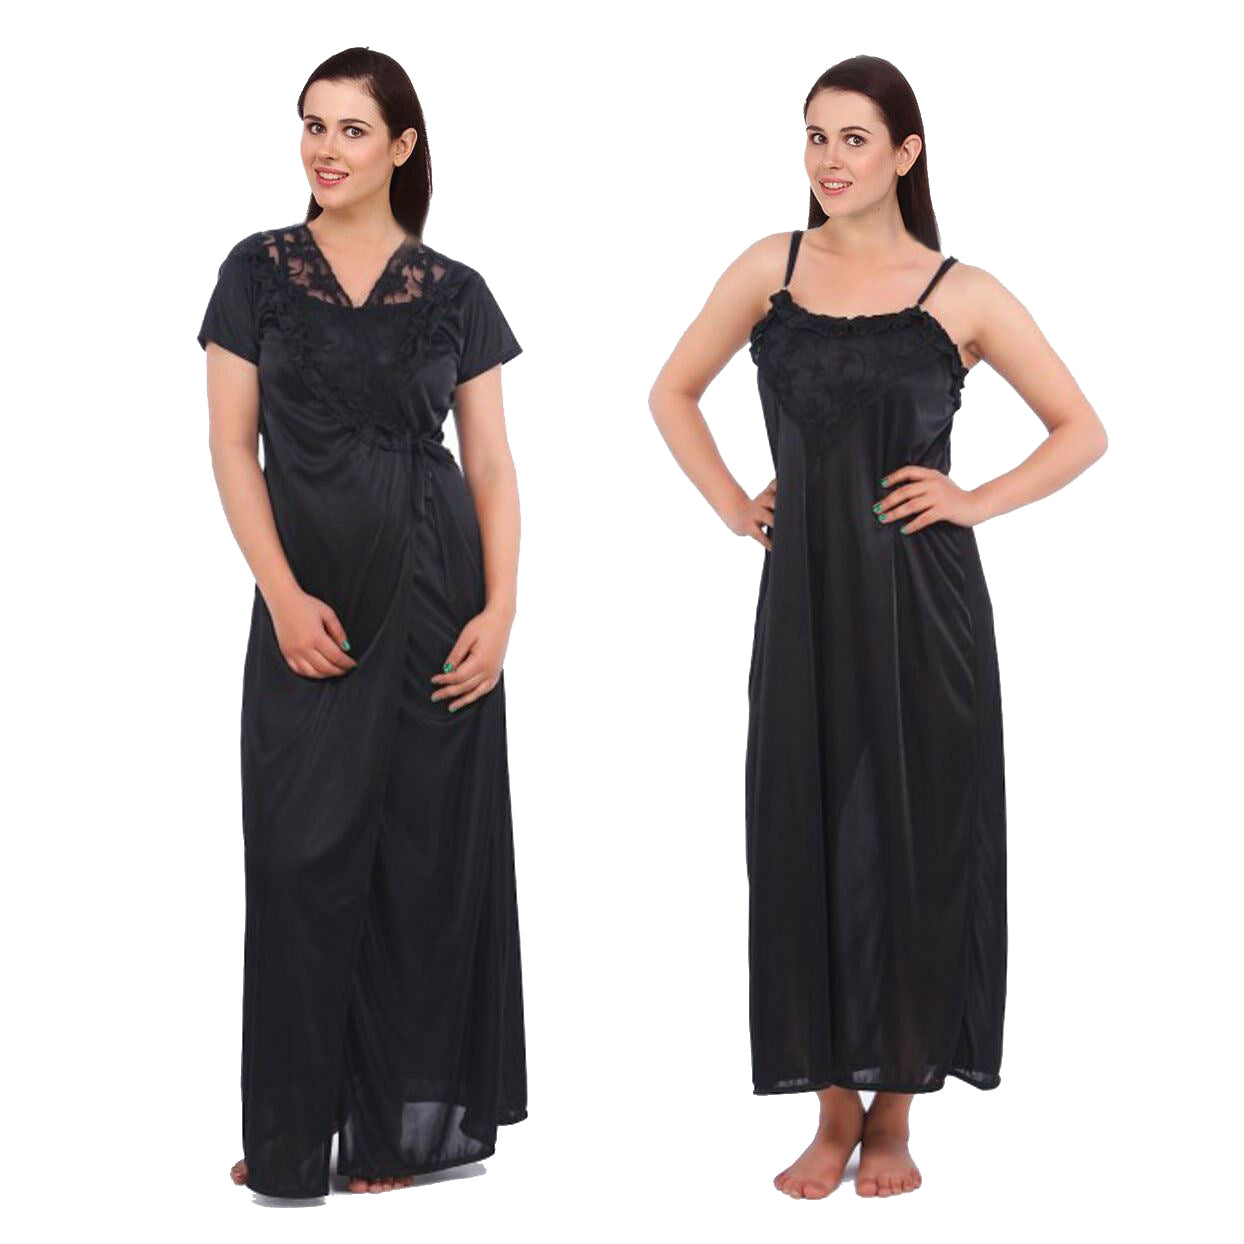 Black / One Size Emma Satin Nightdress and Dressing Gown Set The Orange Tags